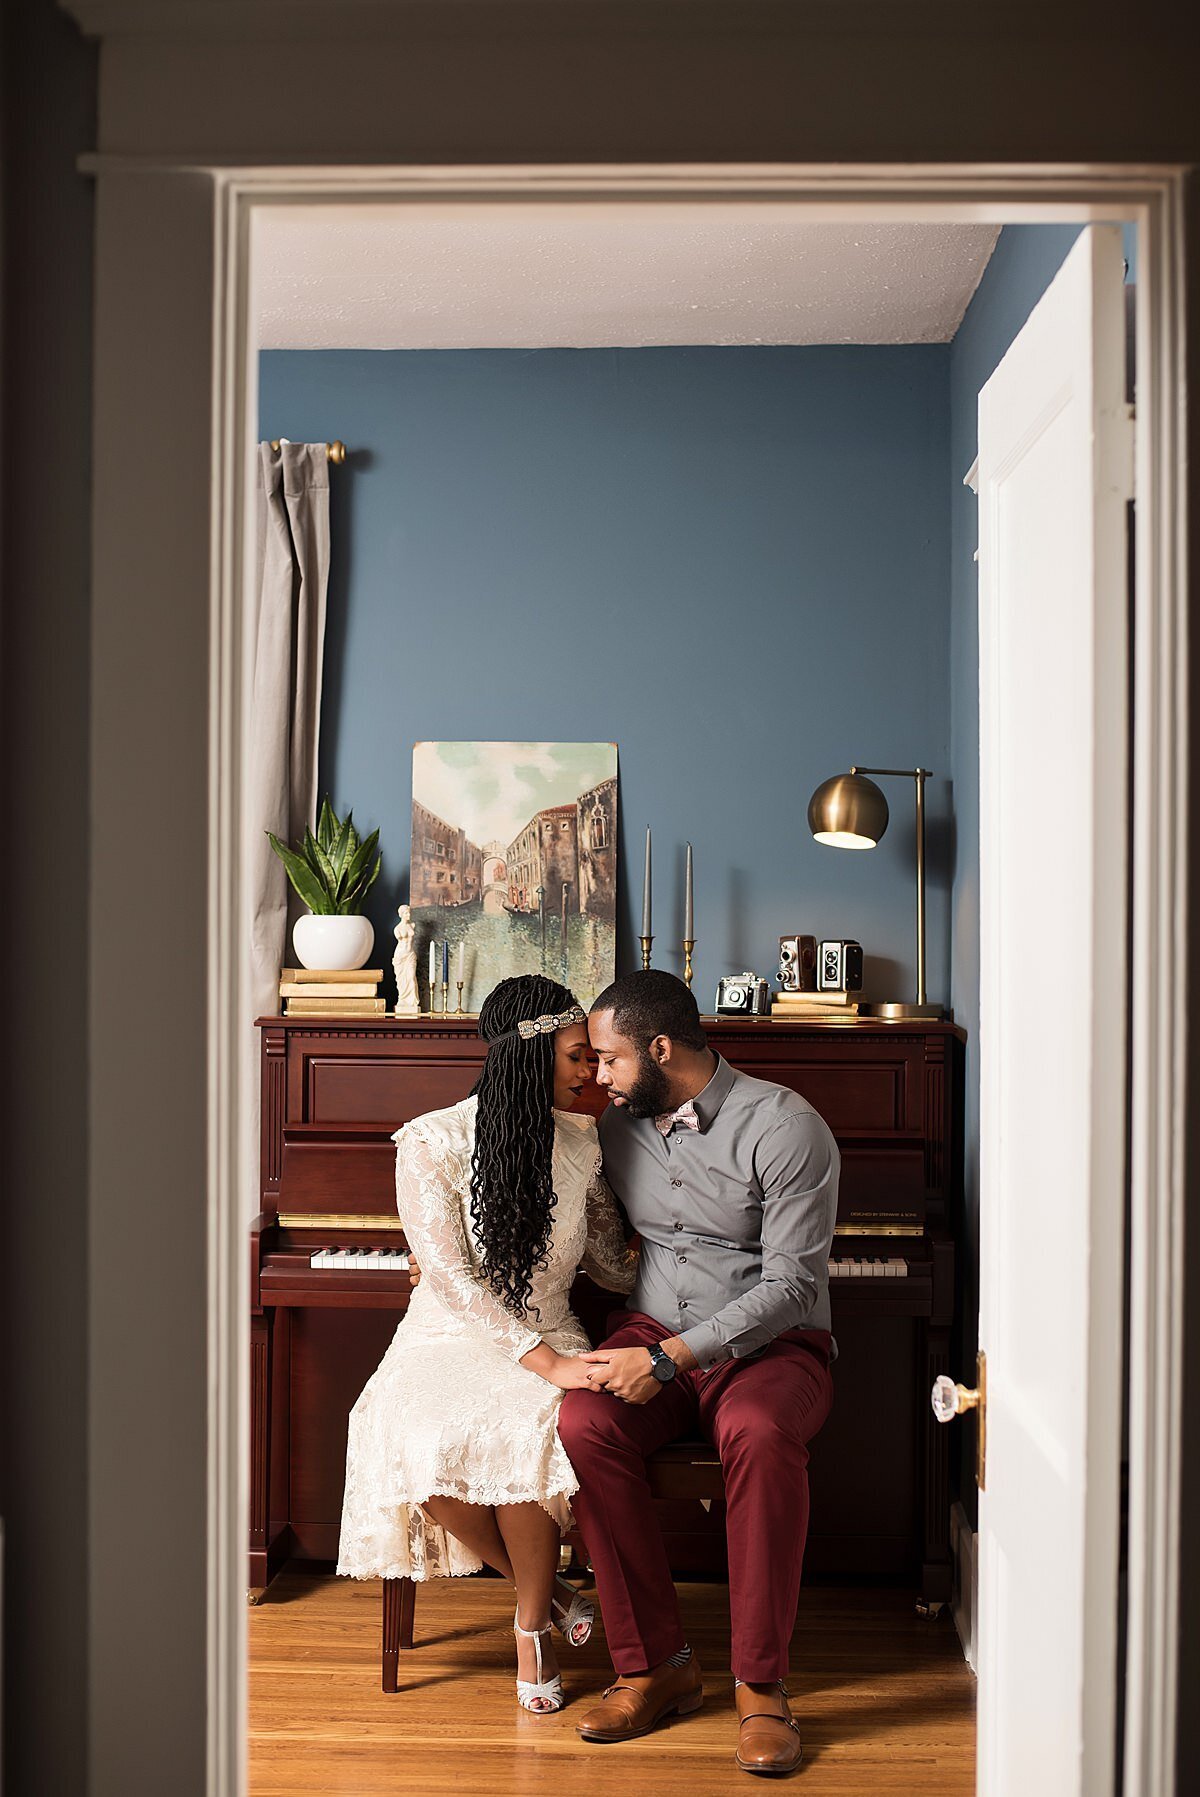 The bride and groom sit in a room with blue walls on a piano bench with an upright piano behind them. The bride is wearing a lace headband and a long sleeved lace fit and flare wedding dress that comes to her knees with t-strap heels. The  bride and groom are touching foreheads and holding hands. The groom is wearing a gray button down shirt with maroon pants and brown shoes. The photo is being taken through an open door with a crystal door knob.